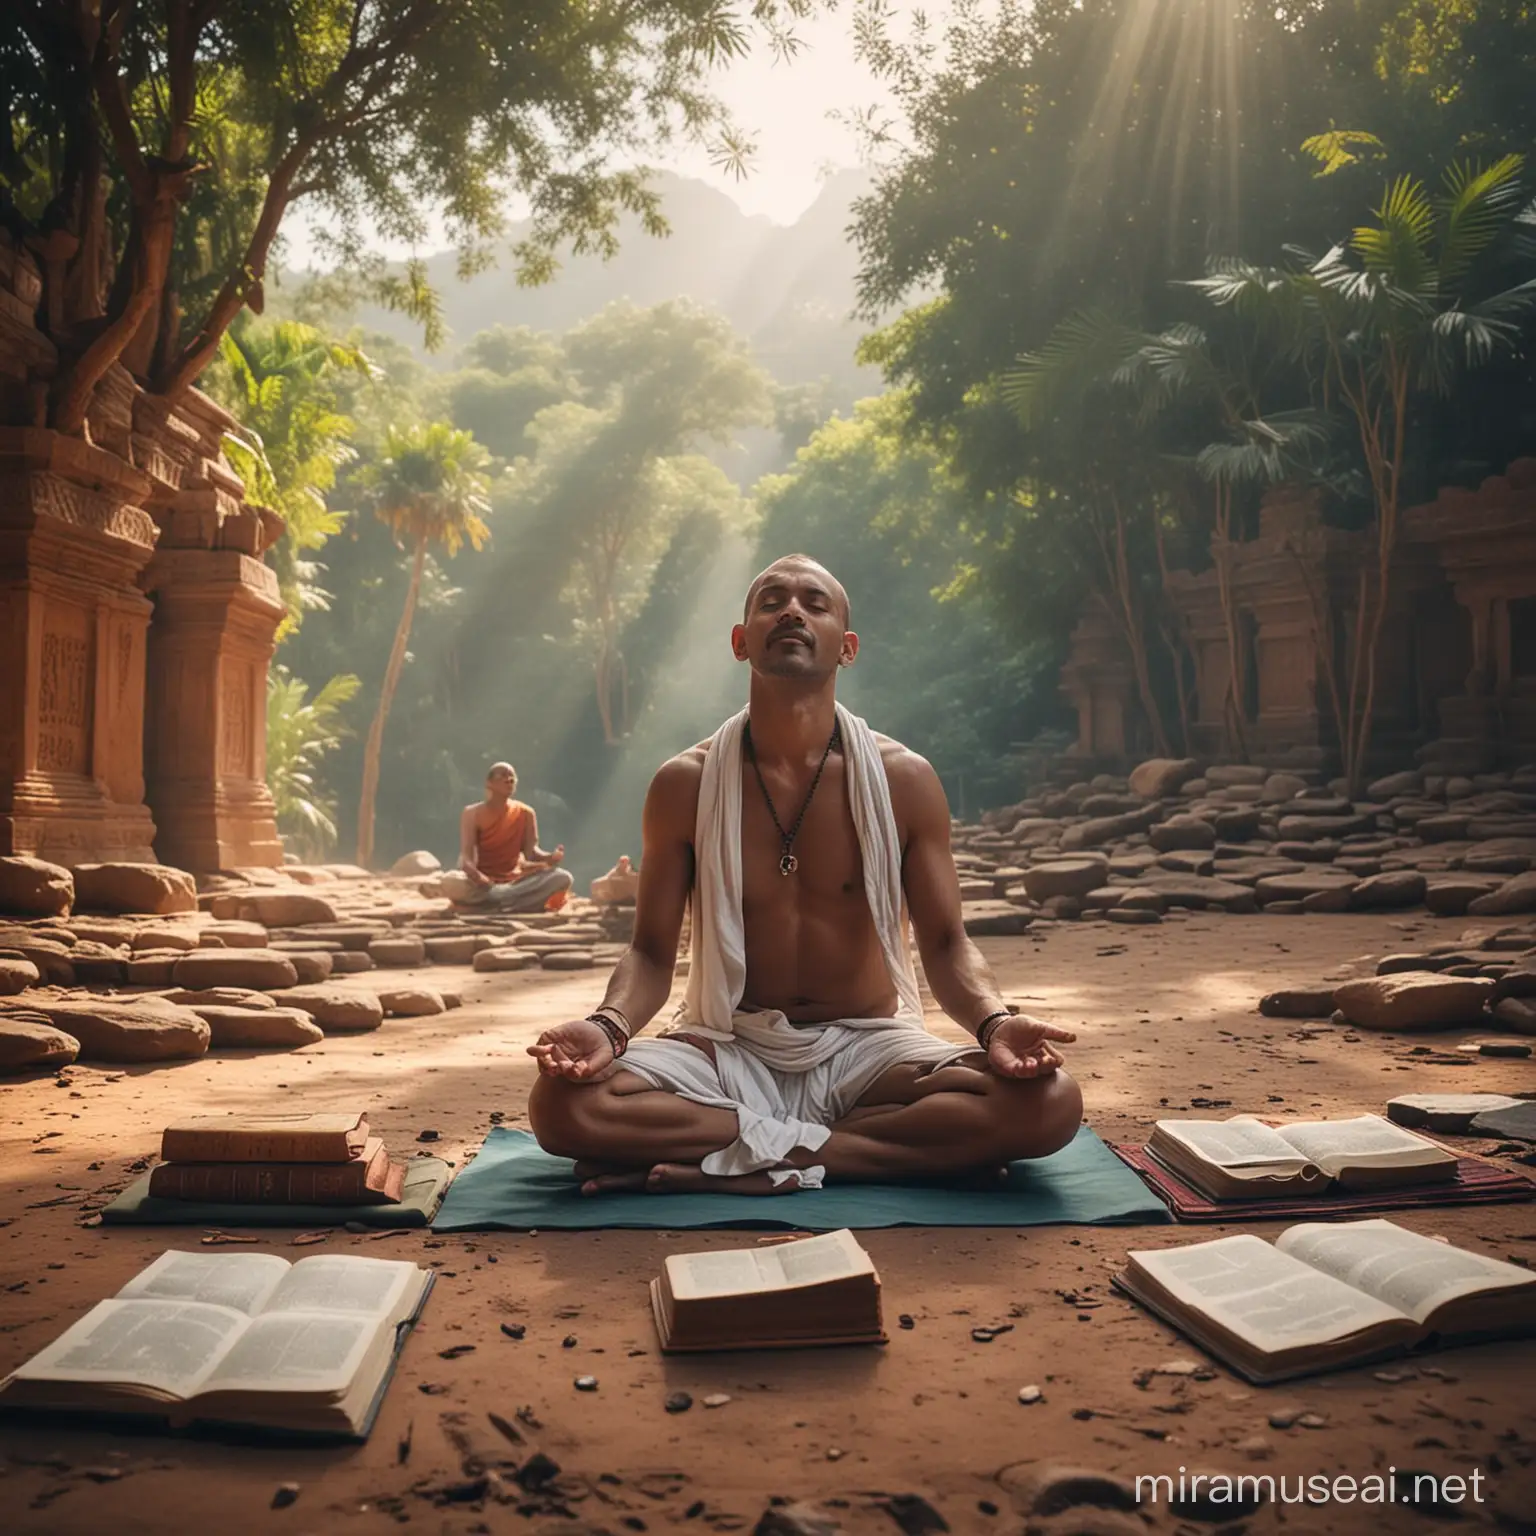 Person Chanting mantras, person  Quoting scriptures,  Discussing the spiritual books,  Sitting cross legged at an exotic locale - all these in a single frame